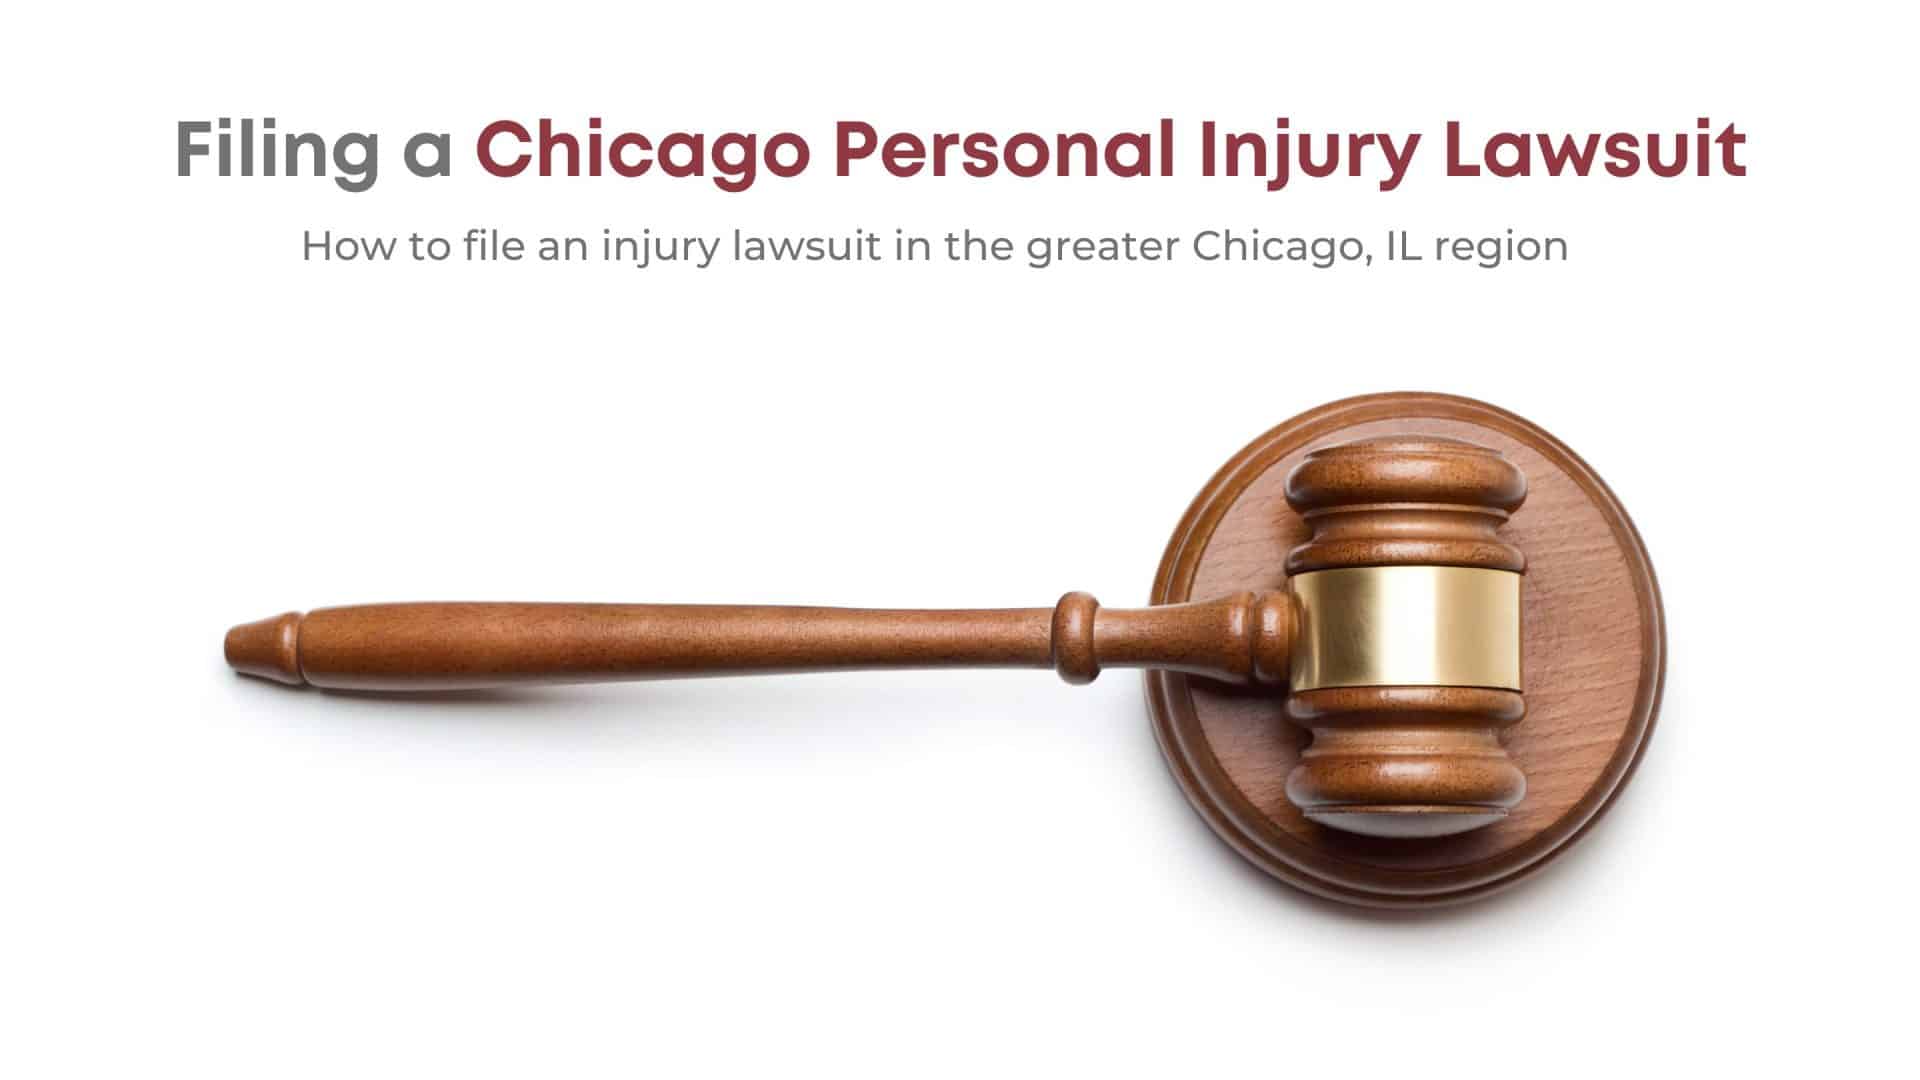 Chicago Personal Injury Lawyer | TorHoerman Law - How Do I File A Chicago Personal Injury Lawsuit? | How Do I File A Chicago Personal Injury Claim? | How Do I File A Chicago Personal Injury Suit?